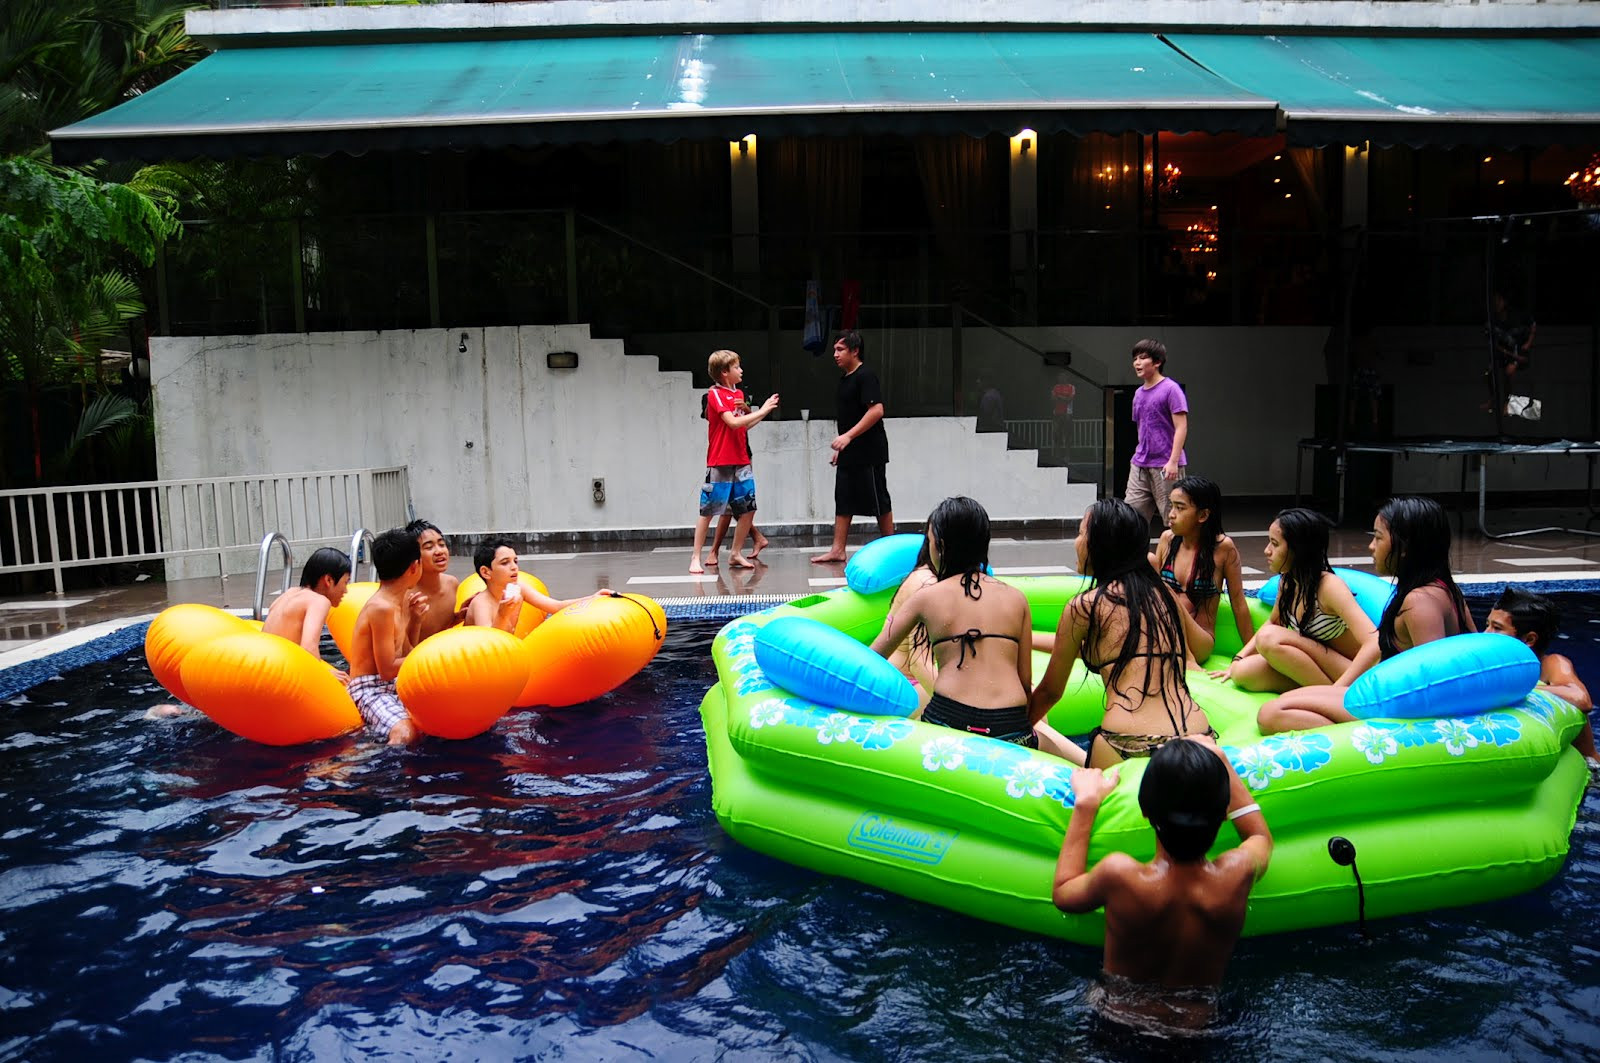 Tween Pool Party Ideas
 Event DirecTus Pool Party FUN for KIDS TEENS & ADULTS